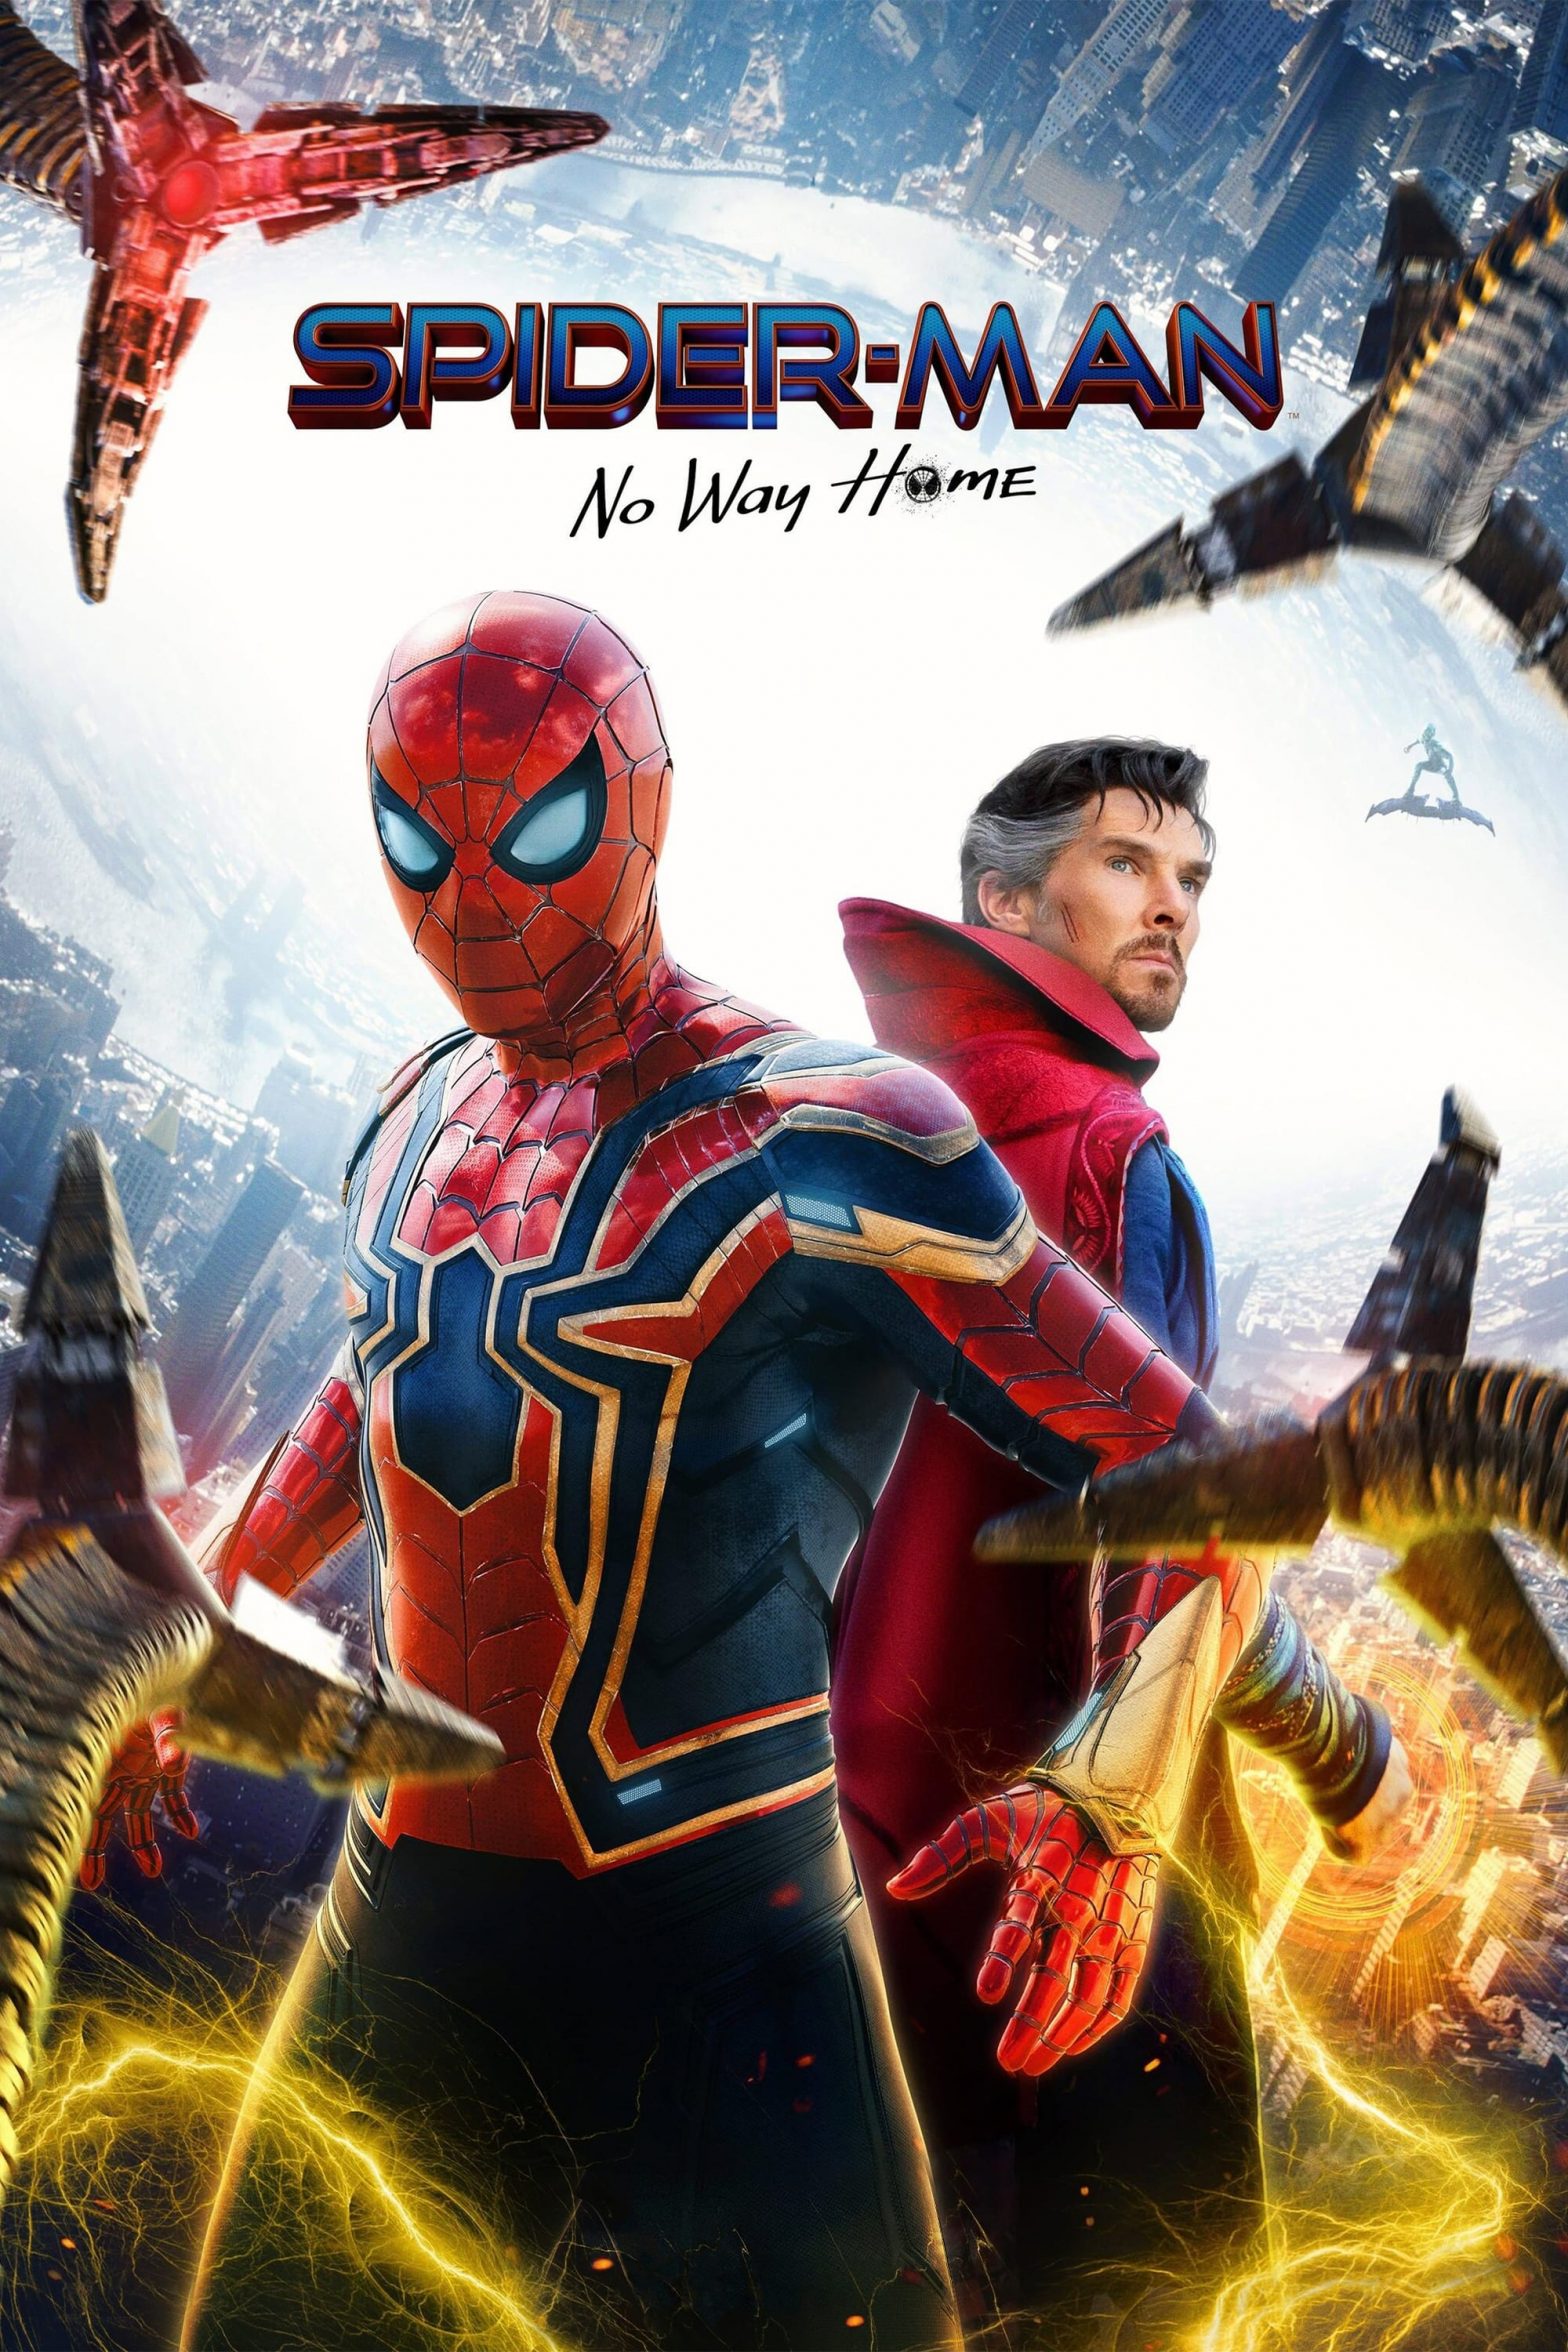 Poster for the movie "Spider-Man: No Way Home"